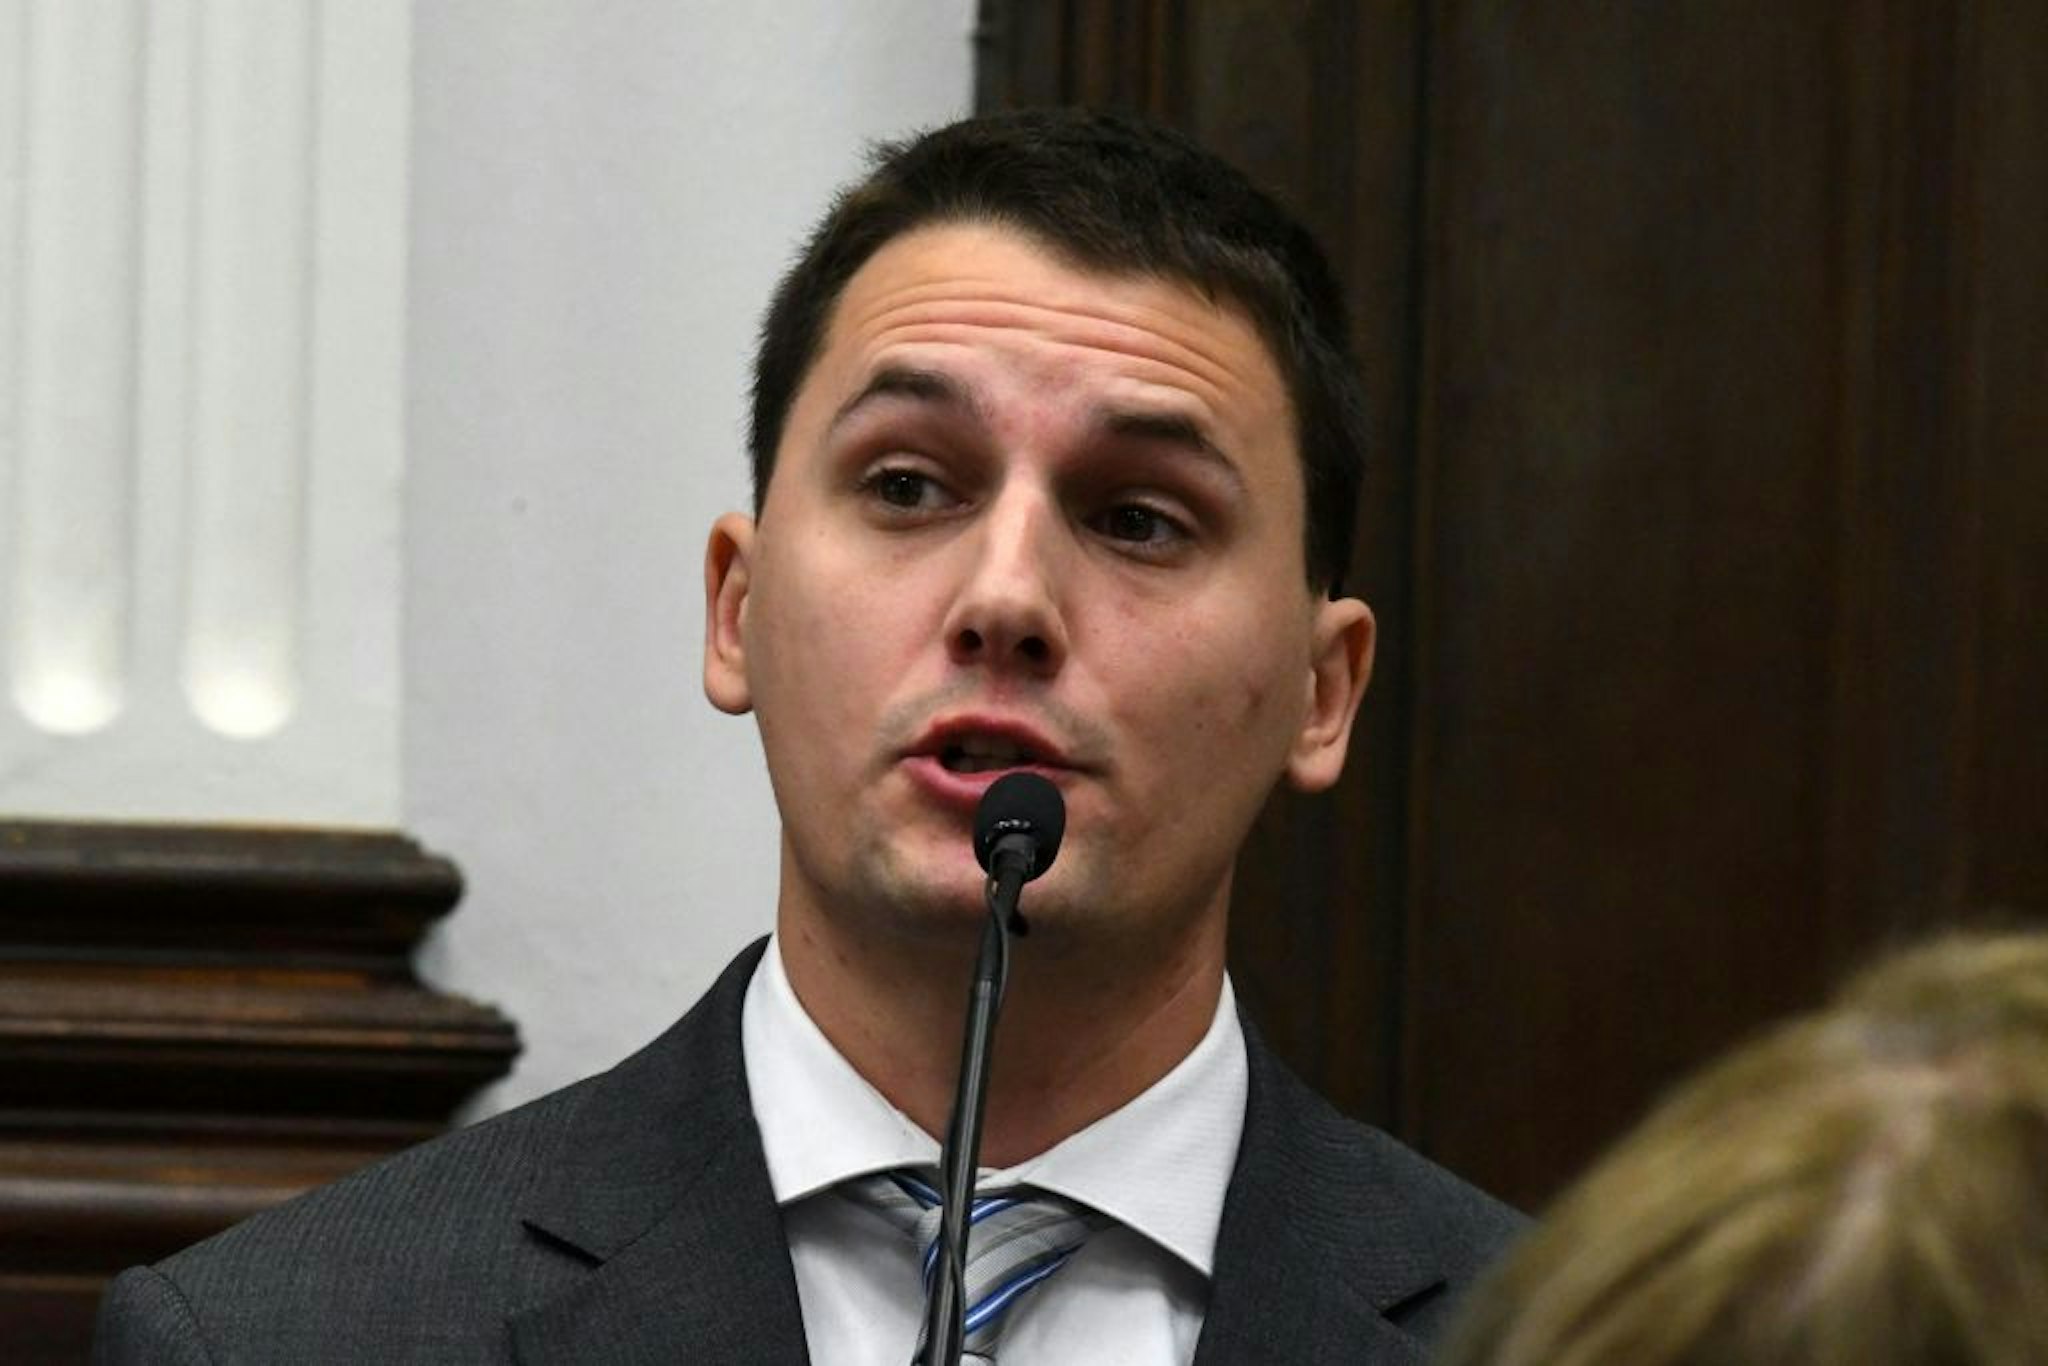 KENOSHA, WISCONSIN - NOVEMBER 05: Military veteran JASON LACKOWSKI testifies during the trial of Kyle Rittenhouse on November 5, 2021 in Kenosha, Wisconsin. Rittenhouse is accused of shooting three demonstrators, killing two of them, during a night of unrest that erupted in Kenosha after a police officer shot Jacob Blake seven times in the back while being arrested in August 2020. Rittenhouse, from Antioch, Illinois, was 17 at the time of the shooting and armed with an assault rifle. He faces counts of felony homicide and felony attempted homicide. (Photo by Mark Hertzberg-Pool/Getty Images)